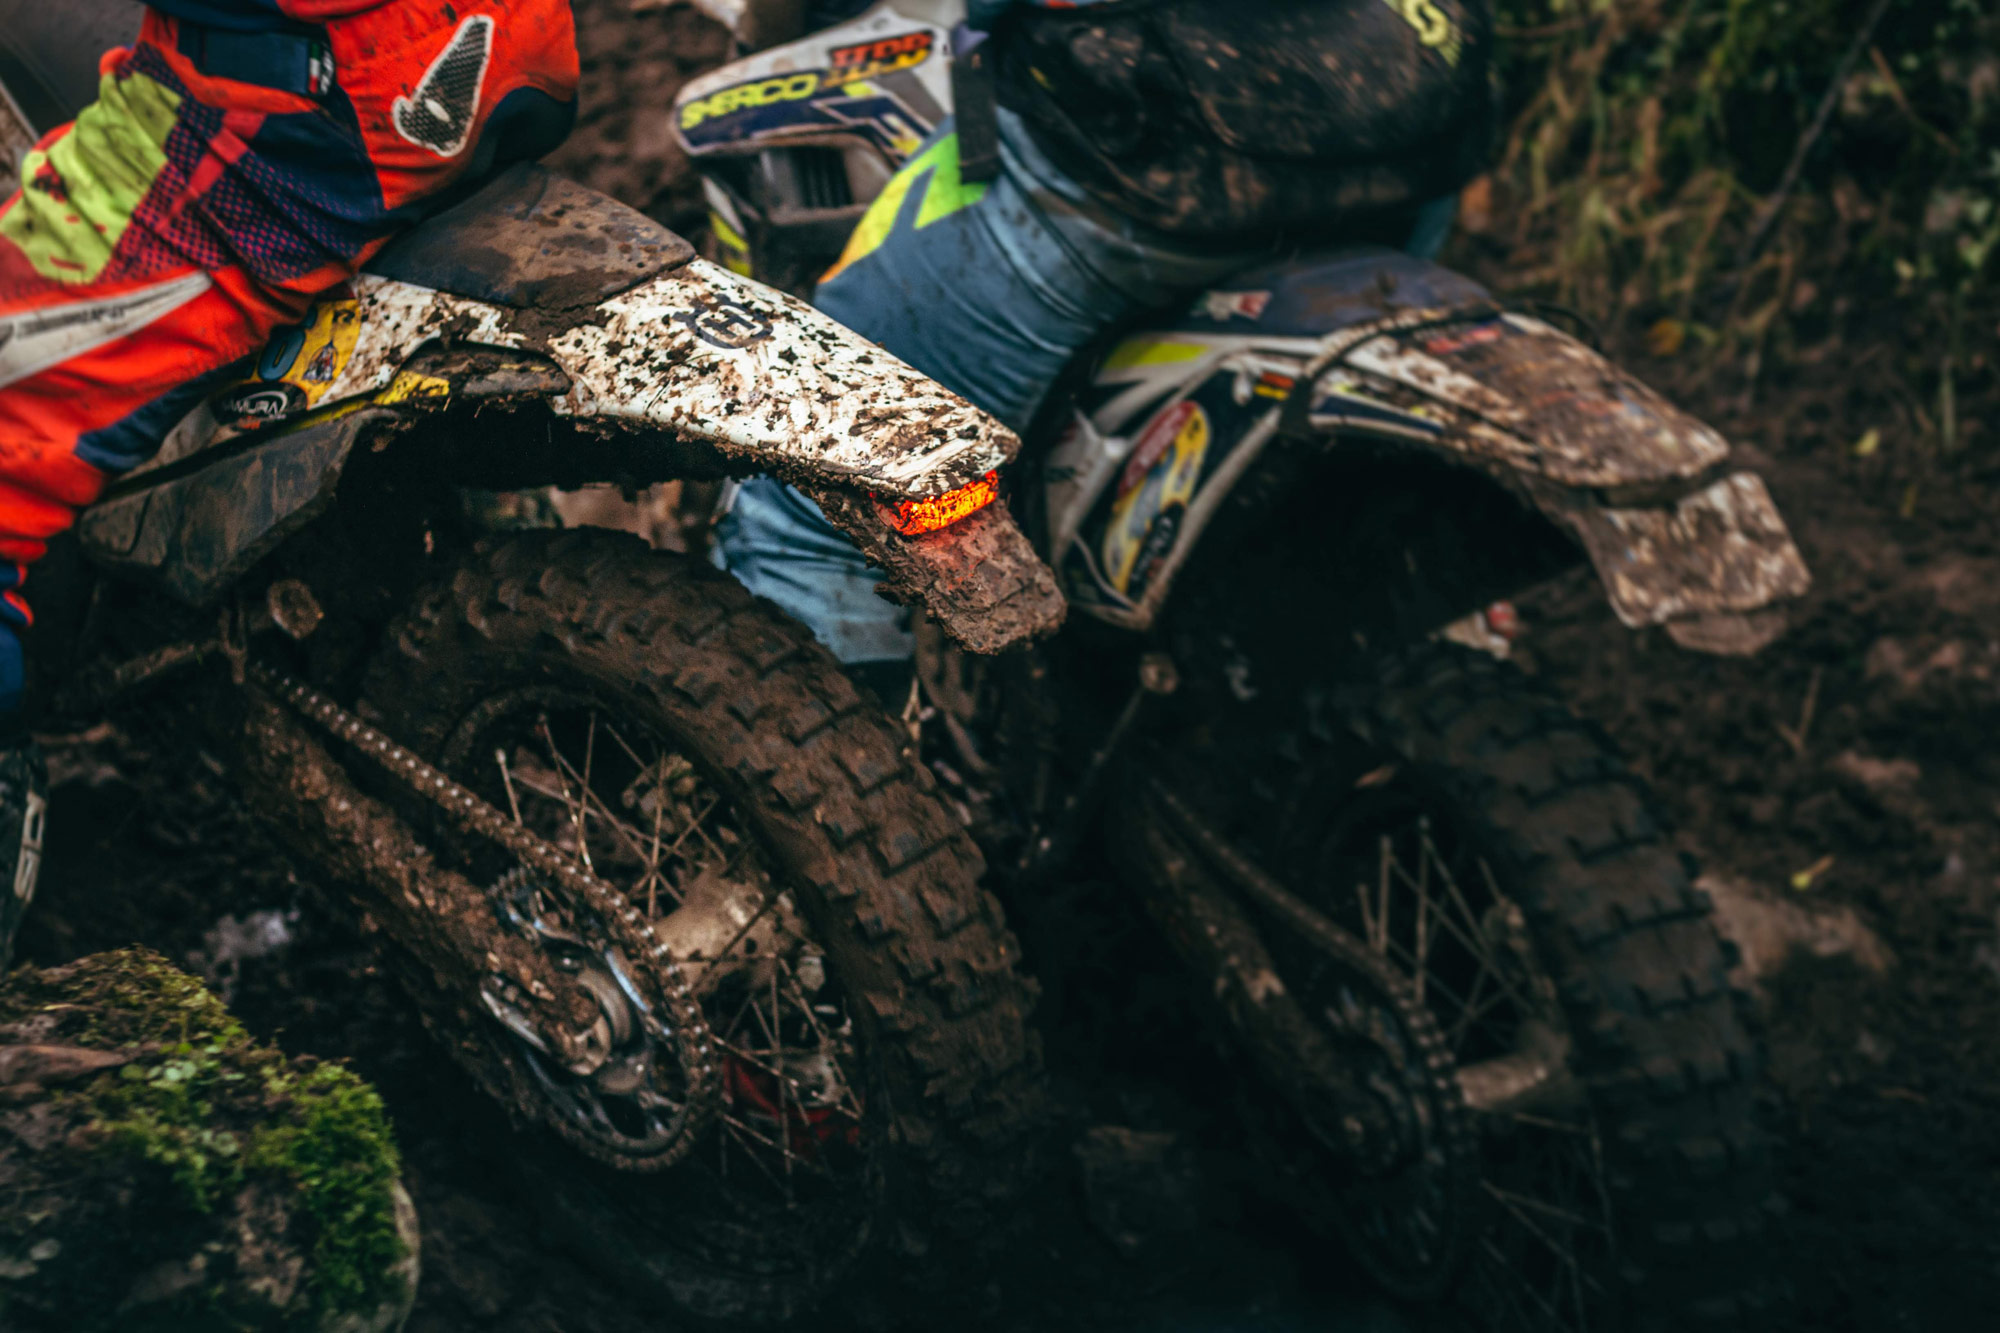 Dirt Biking: Into dirt biking? Hit the trails! The Shuswap is home to a large trail network suitable for off-road vehicles. Consider joining a local club such as Shuswap Dirt Riders to […]